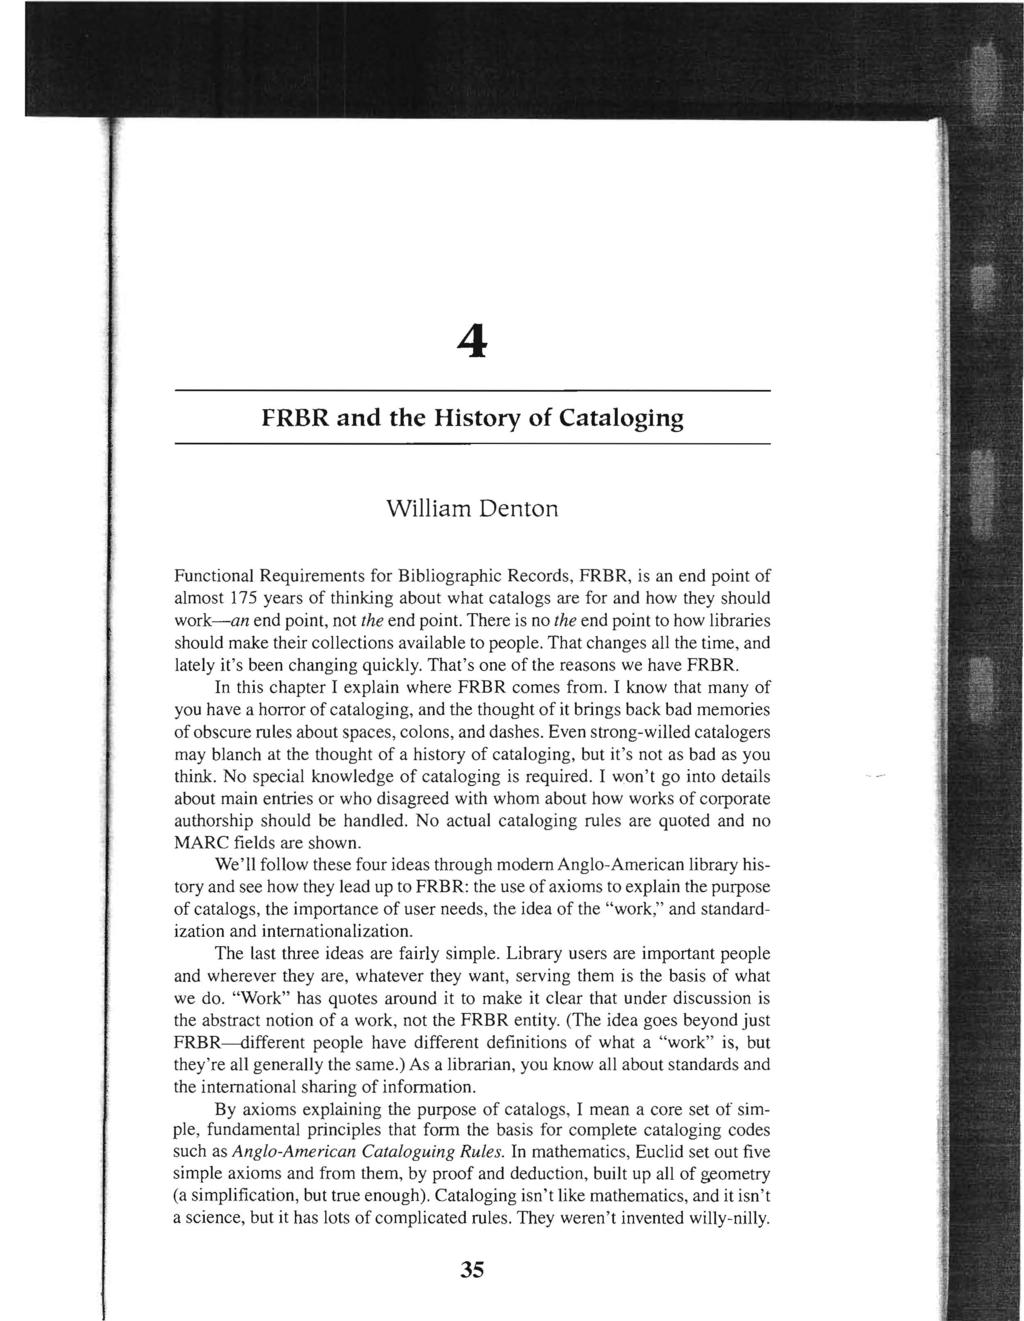 4 FRBR and the History of Cataloging William Denton Functional Requirements for Bibliographic Records, FRBR, is an end point of almost 175 years of thinking about what catalogs are for and how they